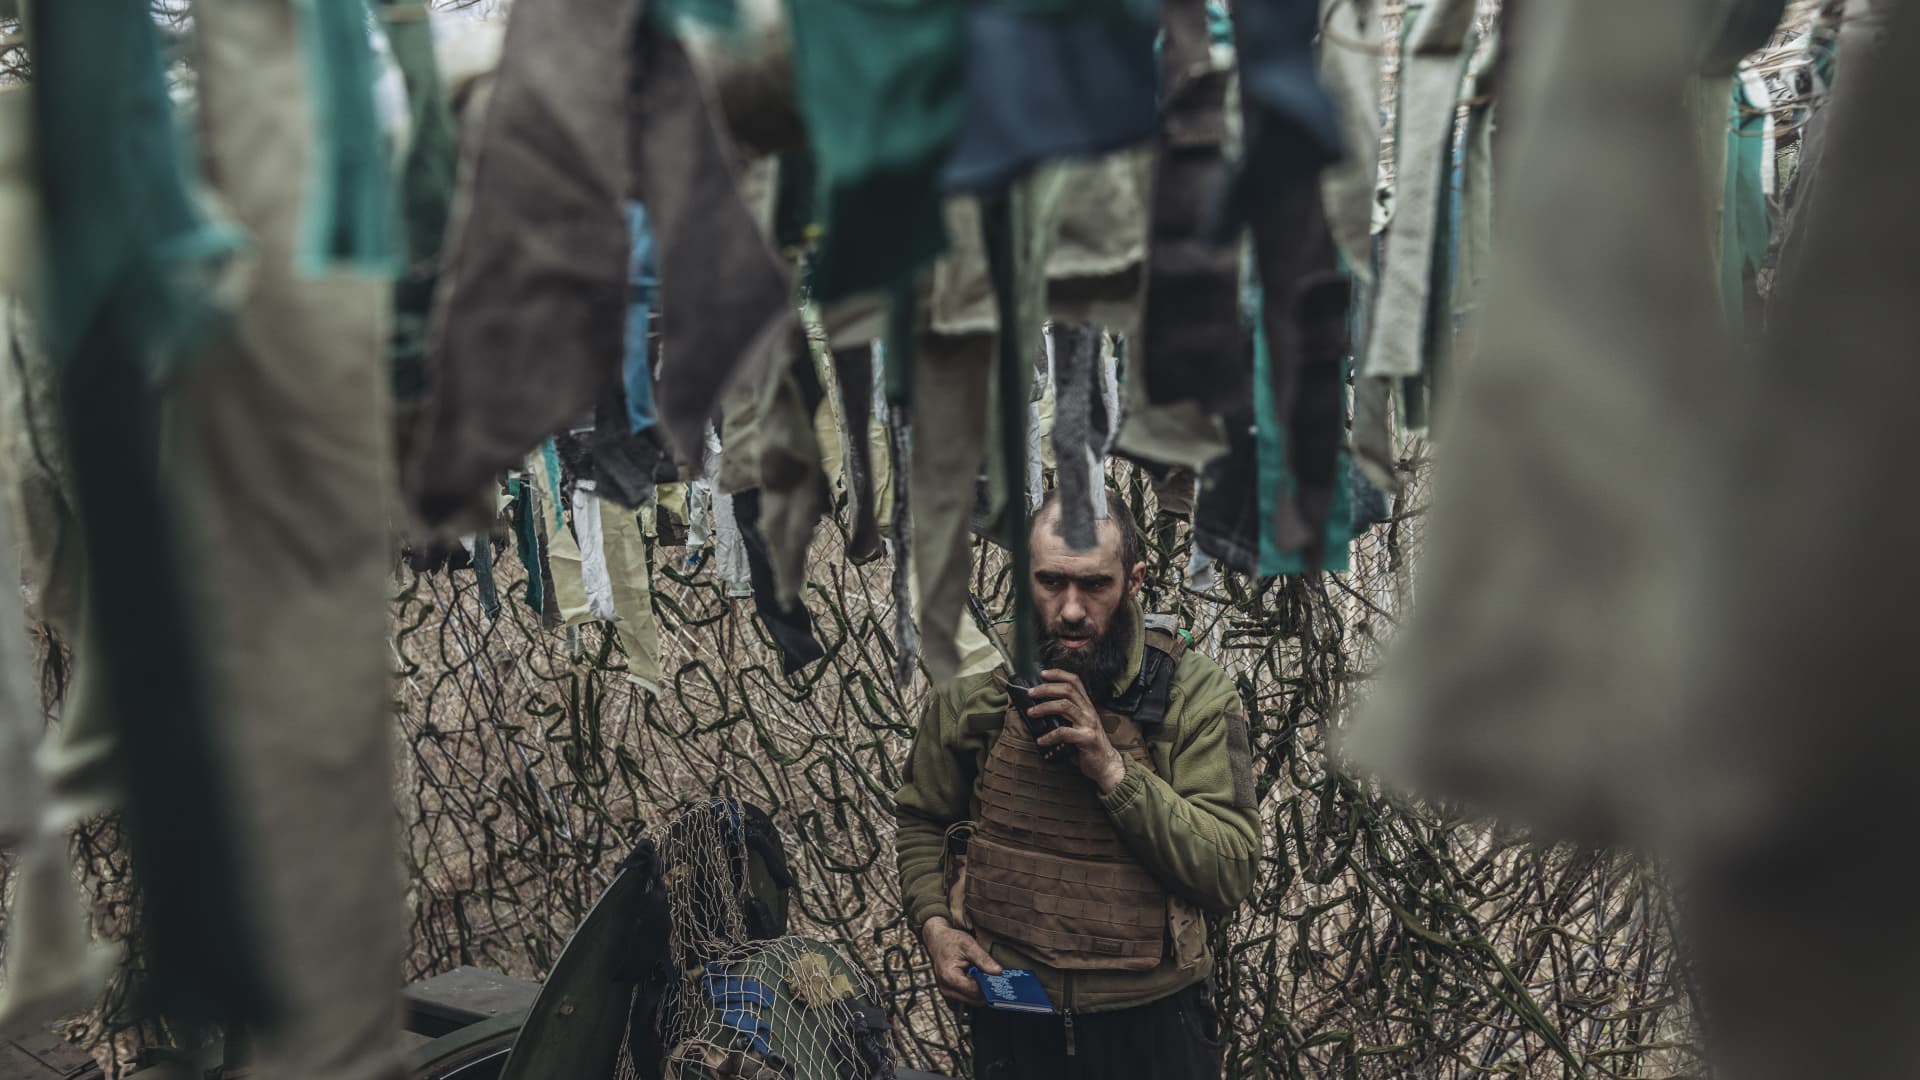 Ukrainian soldiers of the 80th brigade in a trench in the direction of Bakhmut, 26 March 2023.